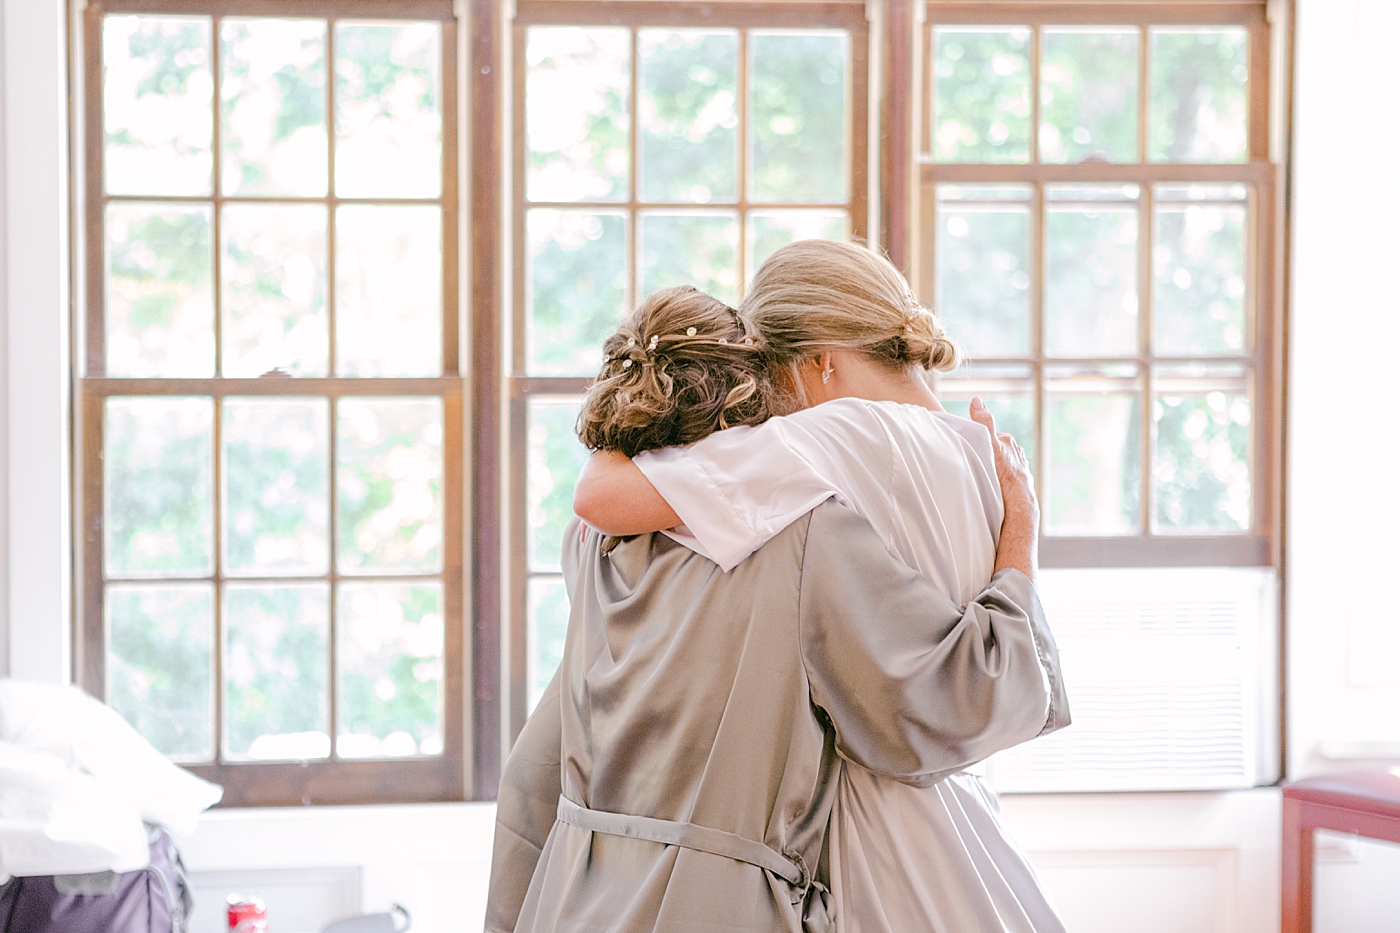 Bride hugging her bridesmaid | Image by Hope Helmuth Photography